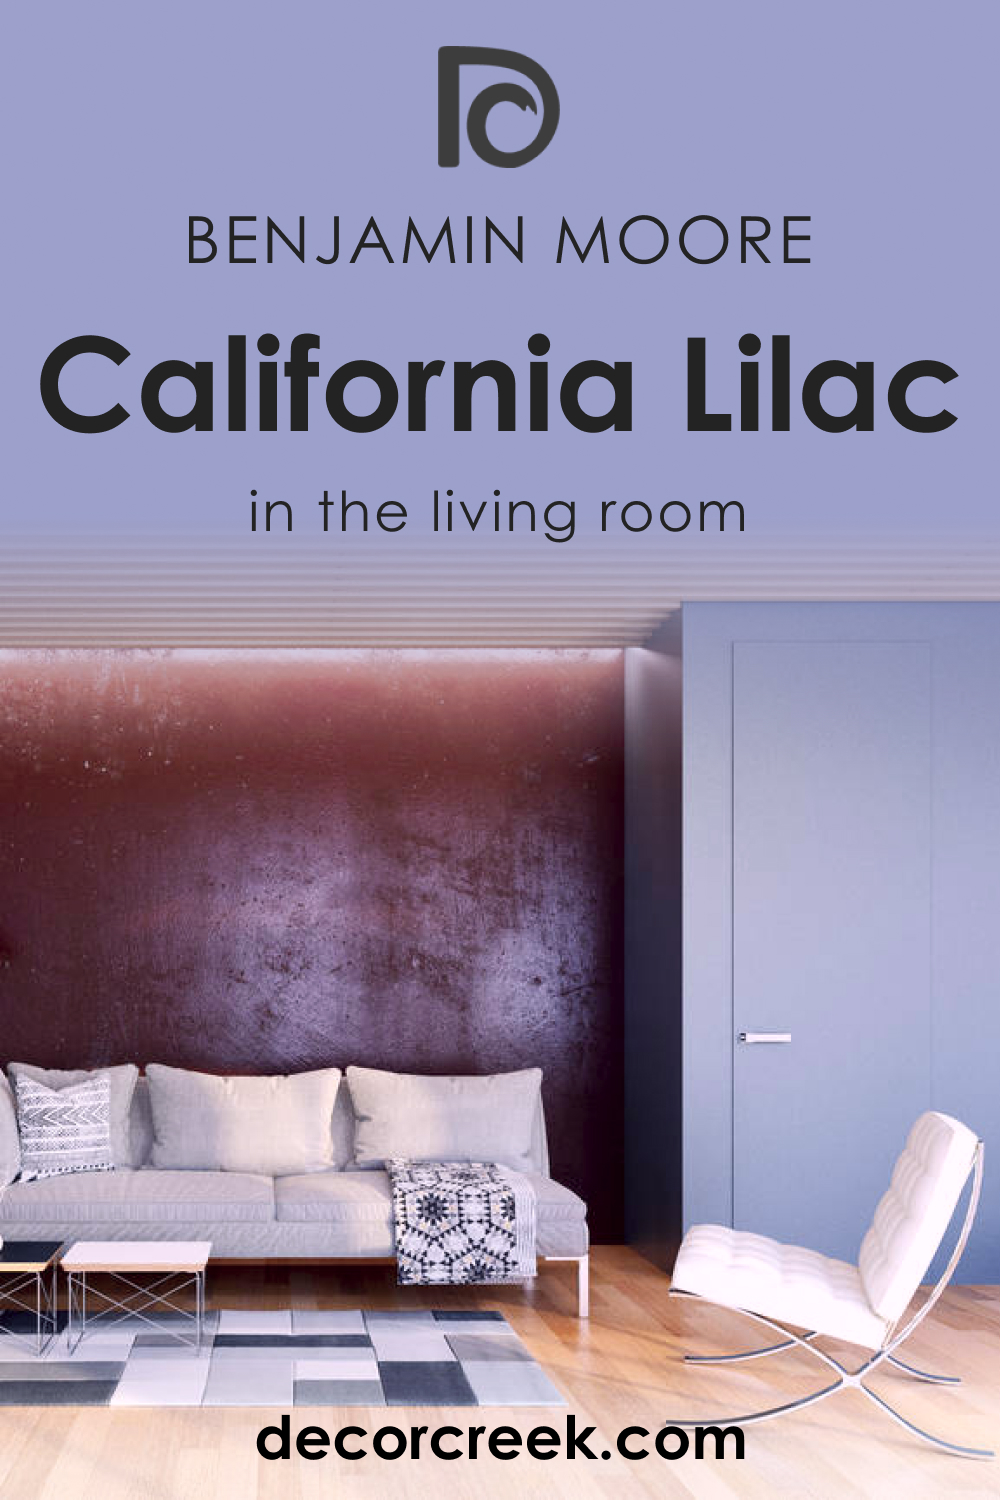 How to Use California Lilac 2068-40 in the Living Room?